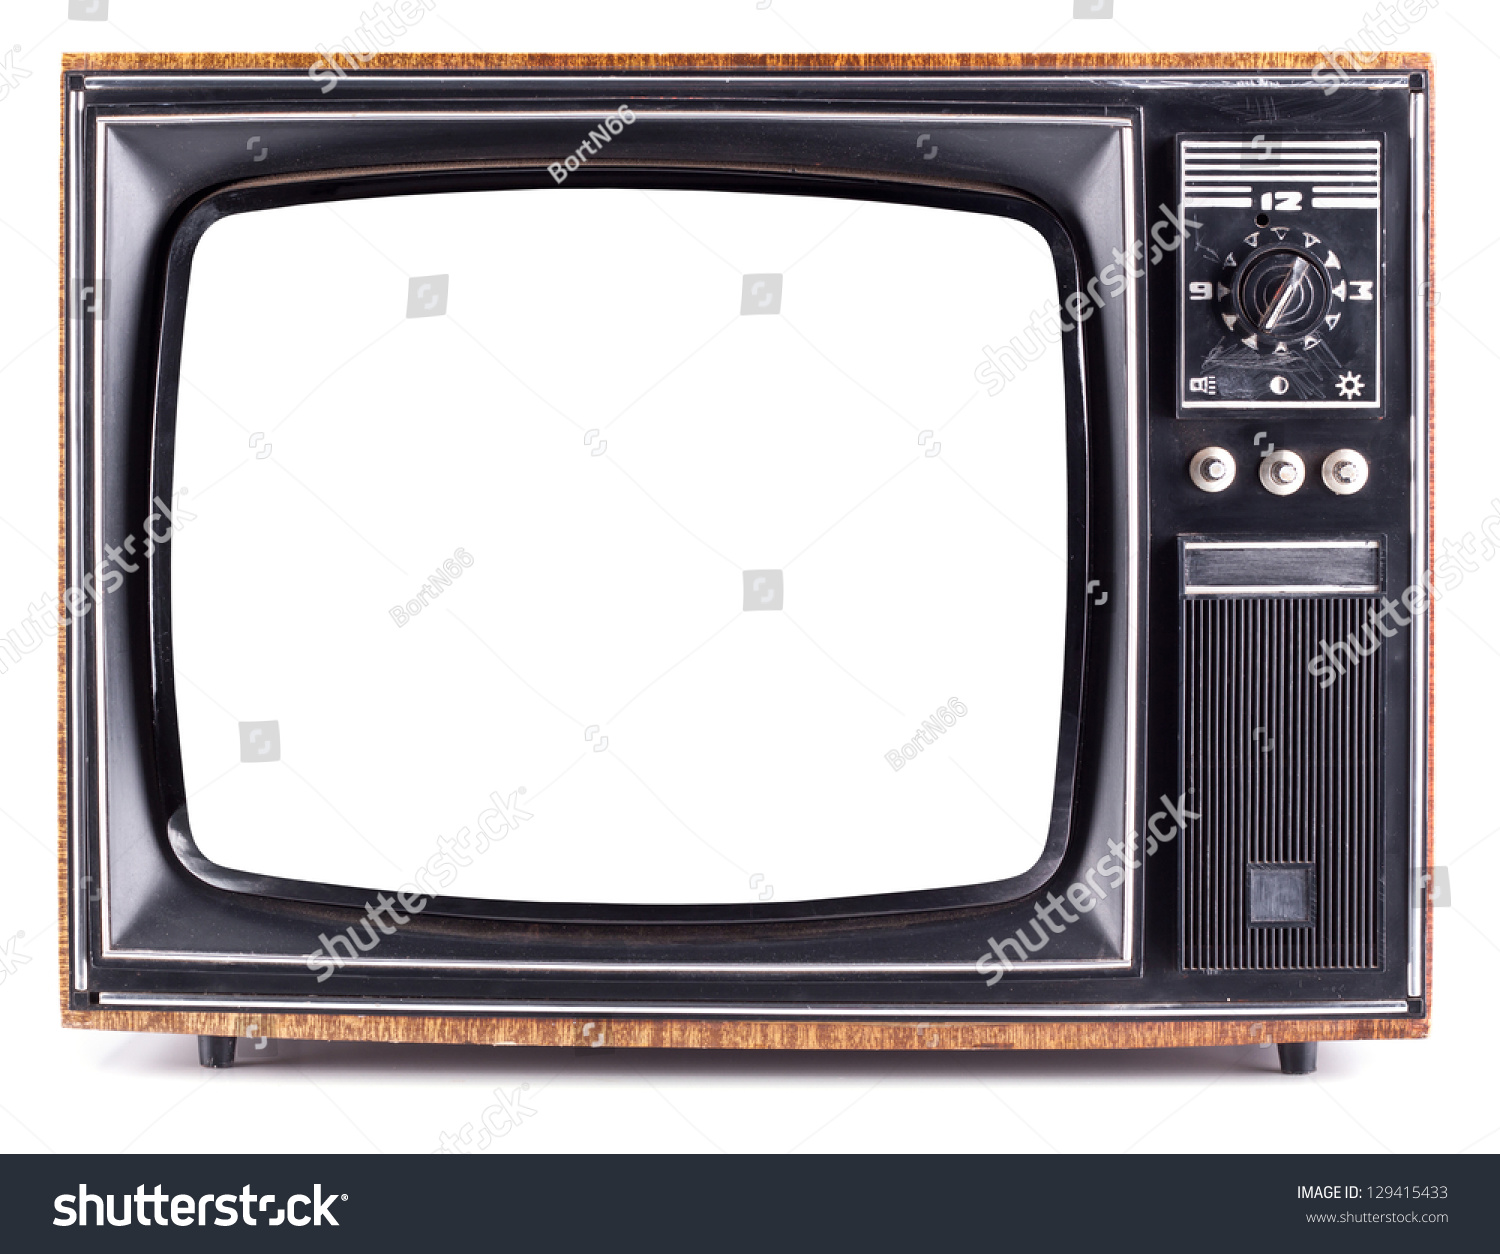 The old TV on the isolated white background #129415433